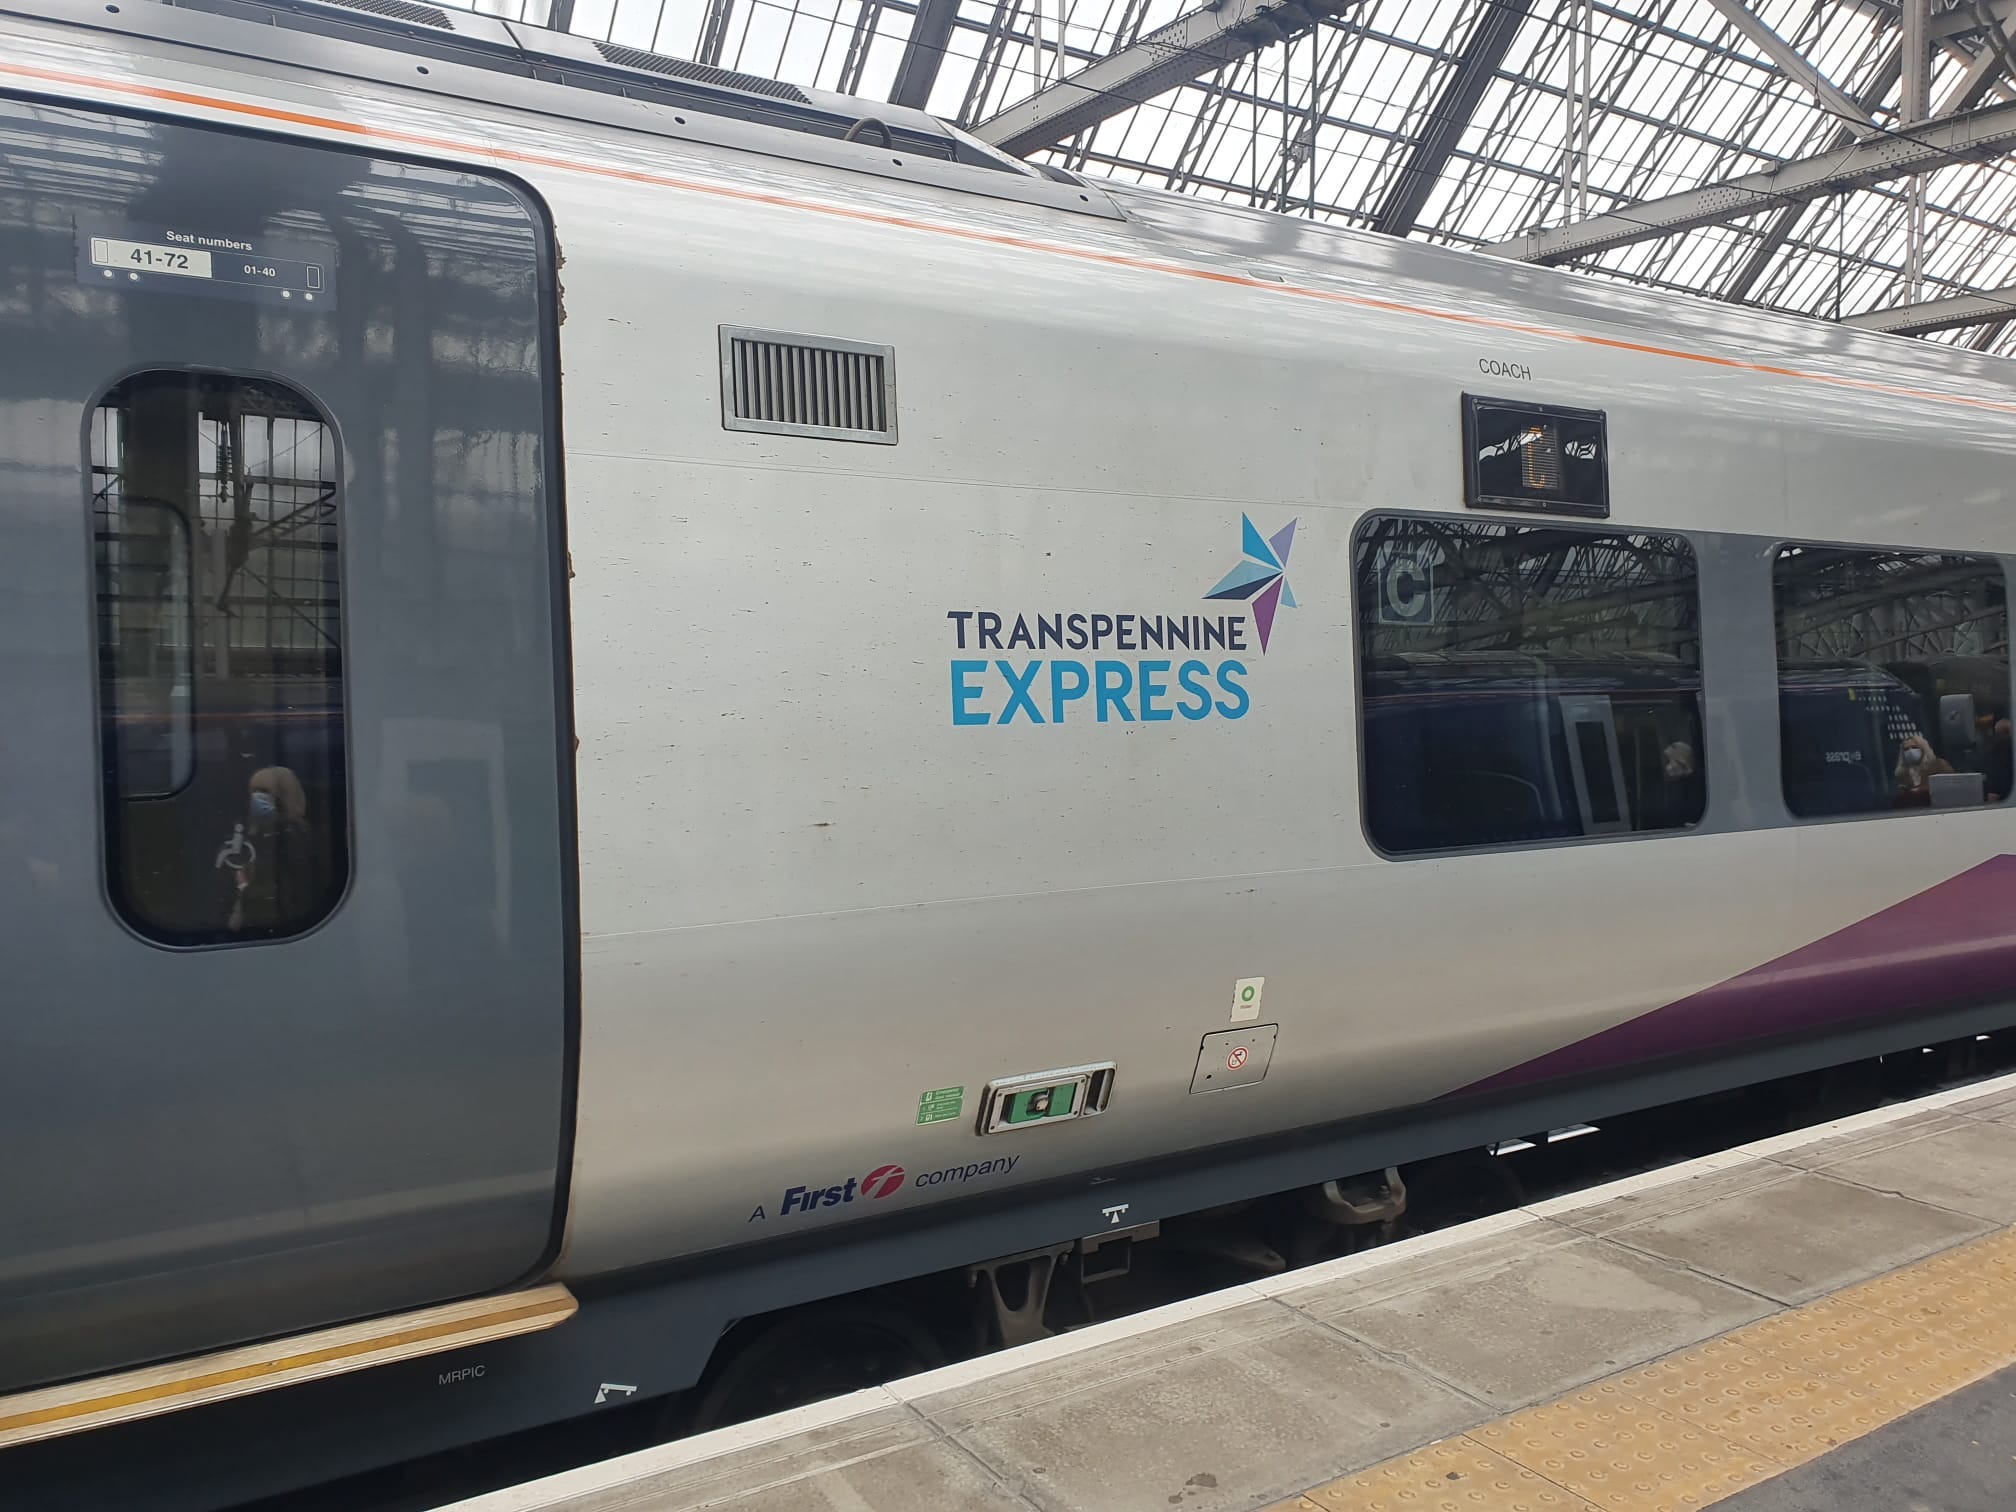 A train carriage in Transpennine Express livery with text reading "Transpennine Express" and a blue and purple star on the side. 